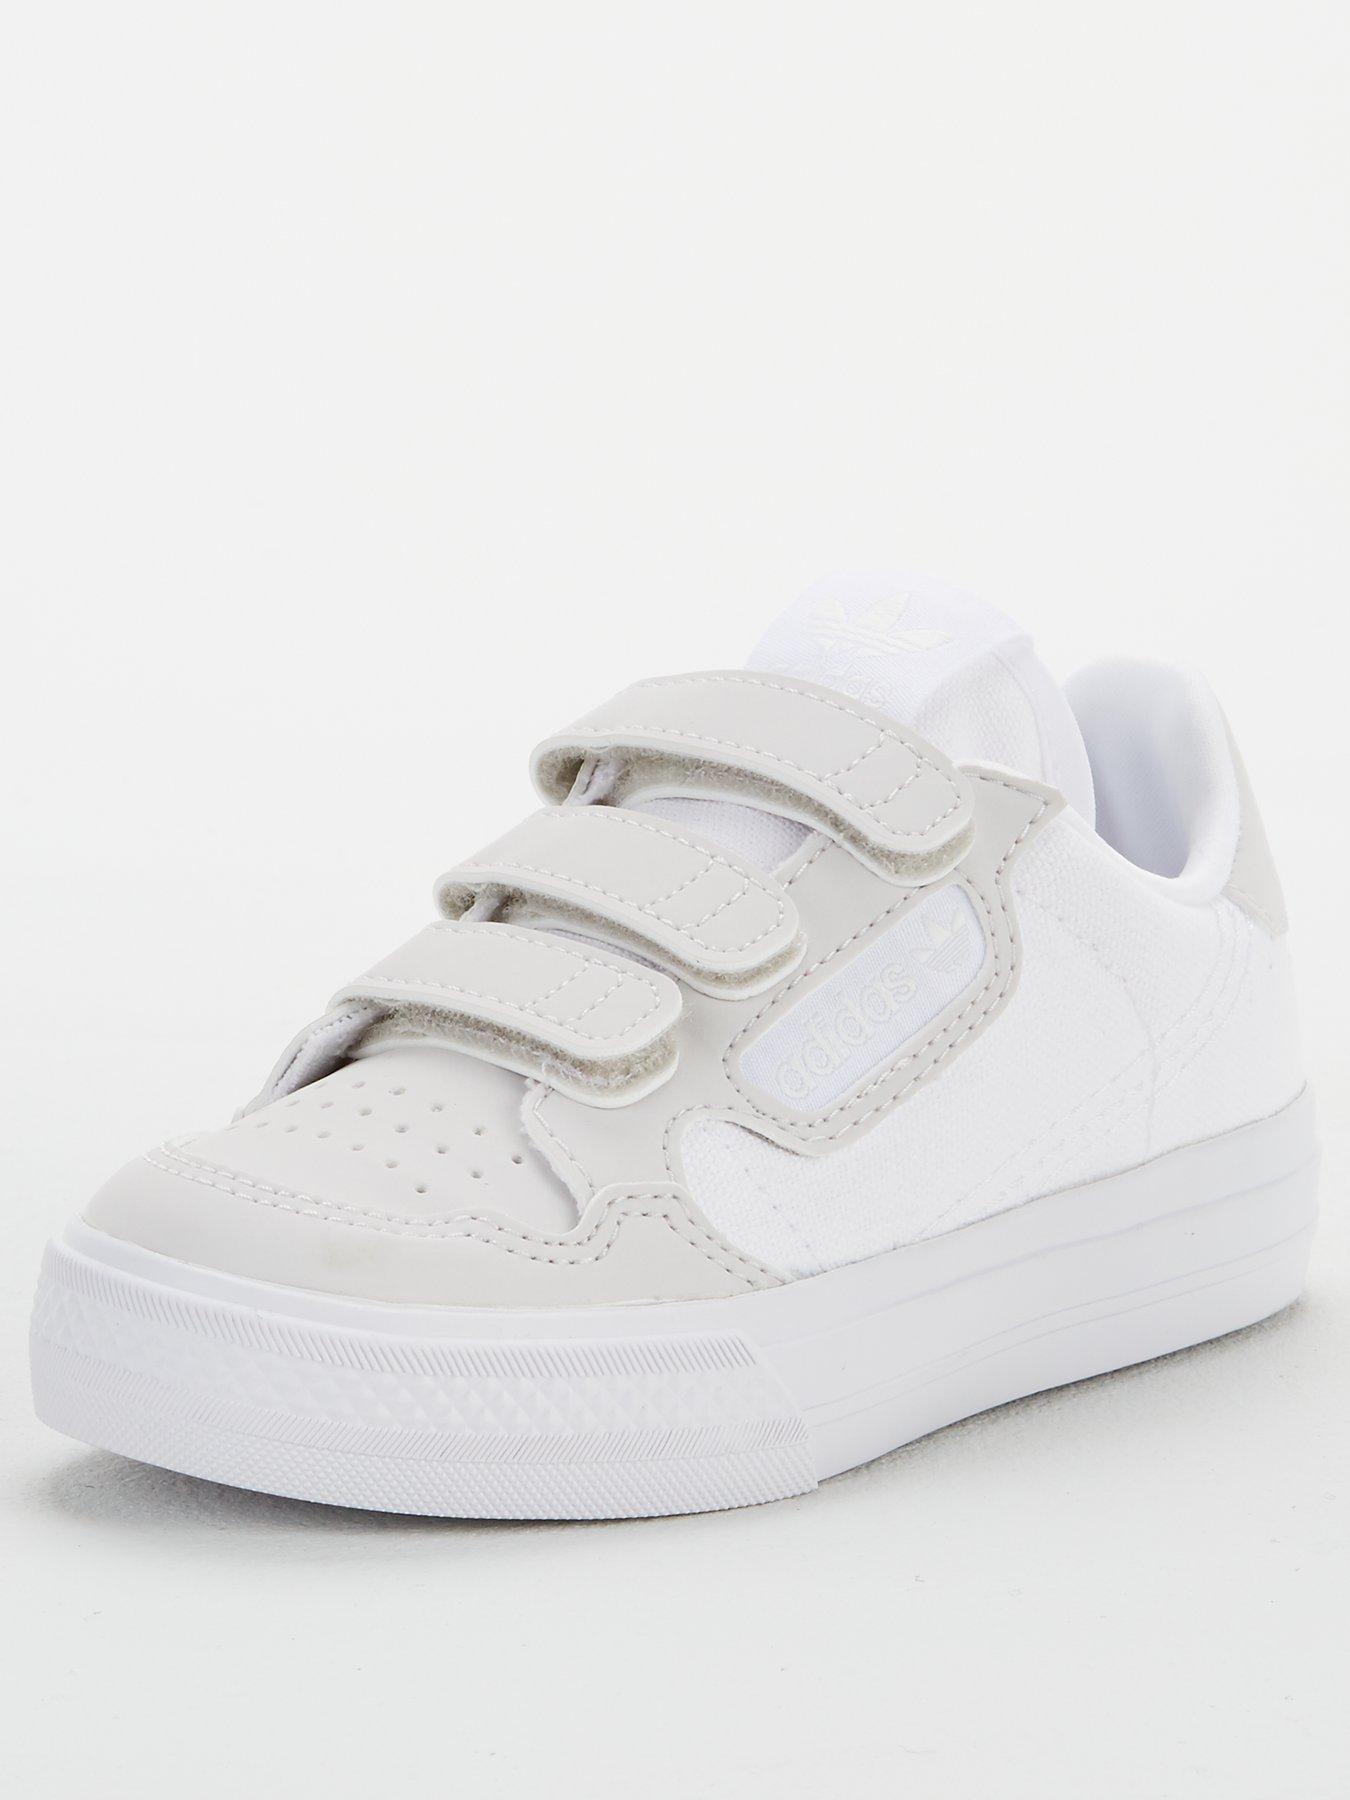 littlewoods boys trainers